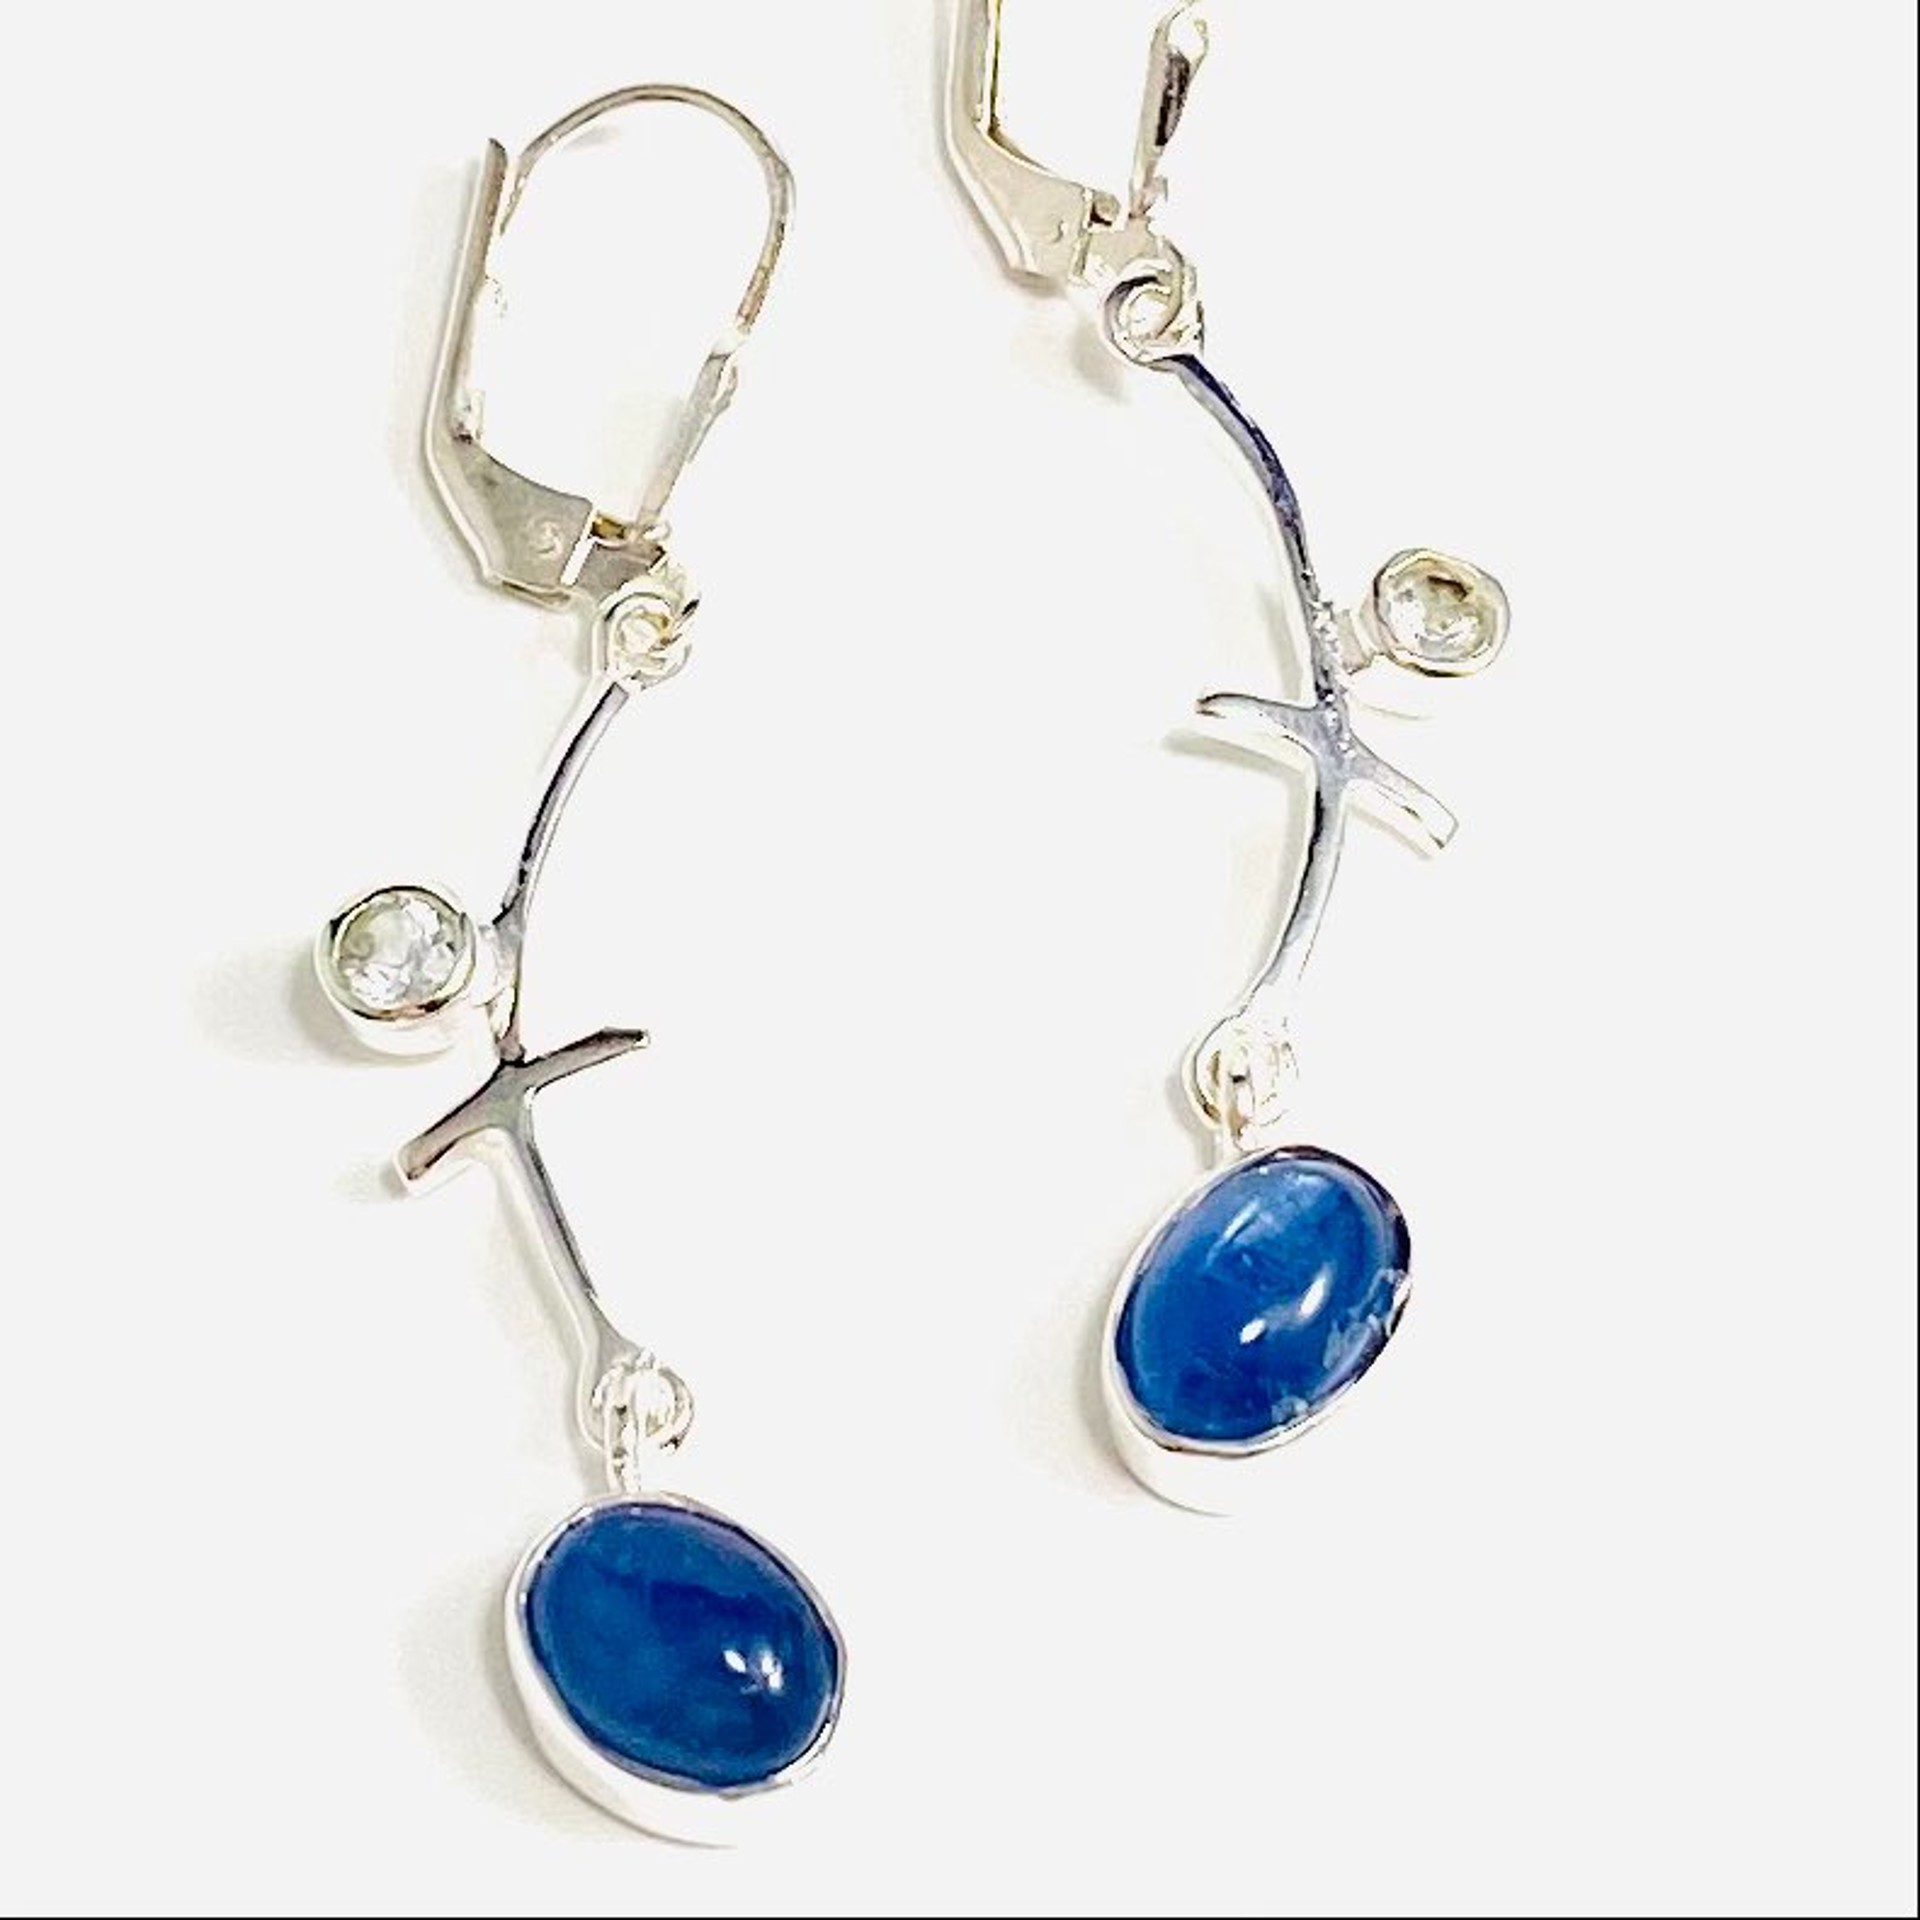 MON SE 3268 Kyanite and Blue Topaz Earrings, french wire clasp by Monica Mehta